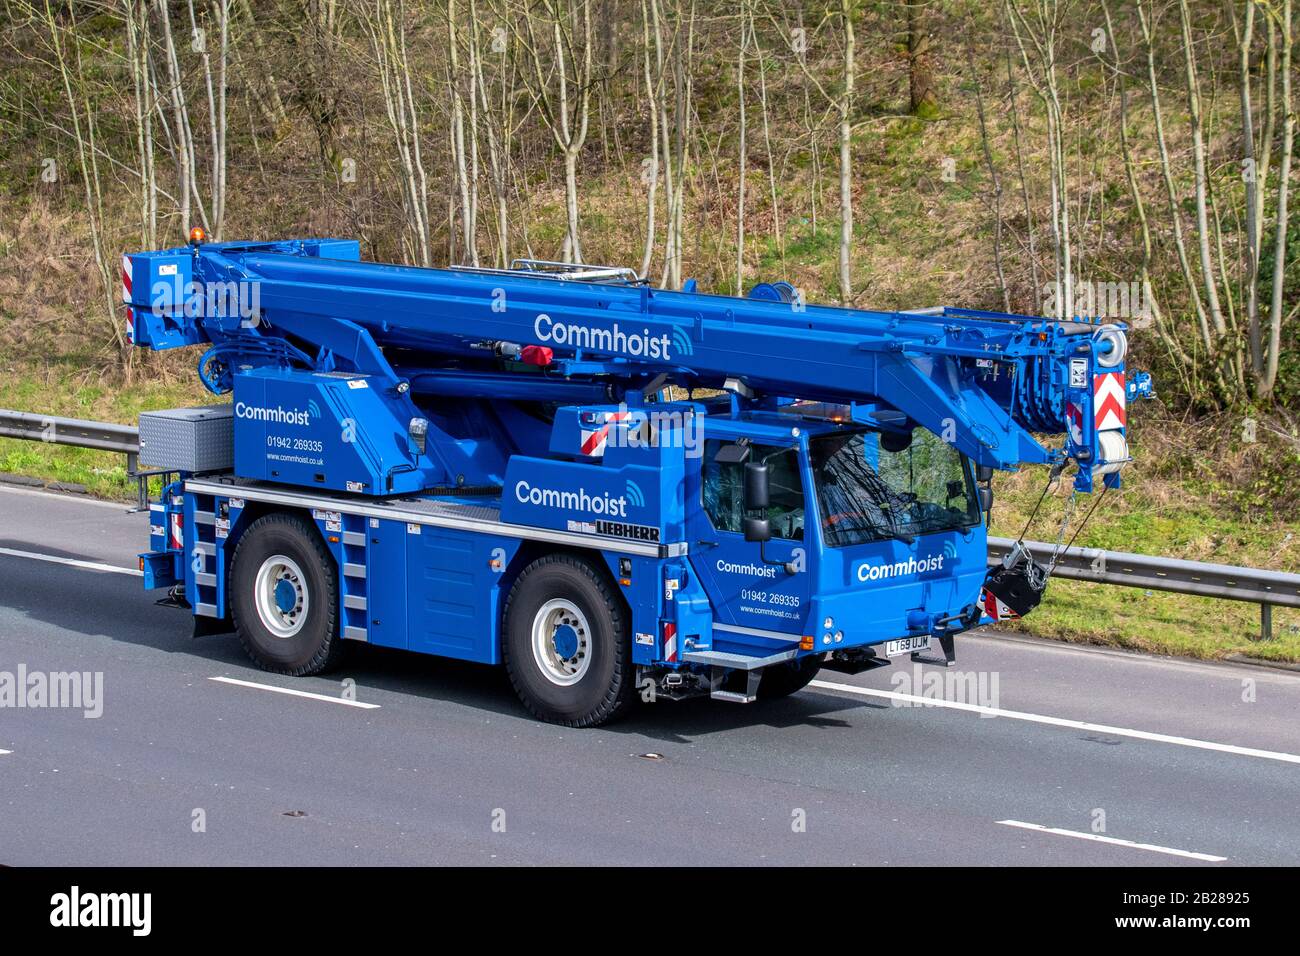 Liebherr Commhoist, 2019 blue Liebherr Ltm1040-2.1;  HGV Haulage delivery trucks, lorry, transportation, truck, cargo carrier, travelling vehicle, European commercial transport industry, M61 at Manchester, UK Stock Photo